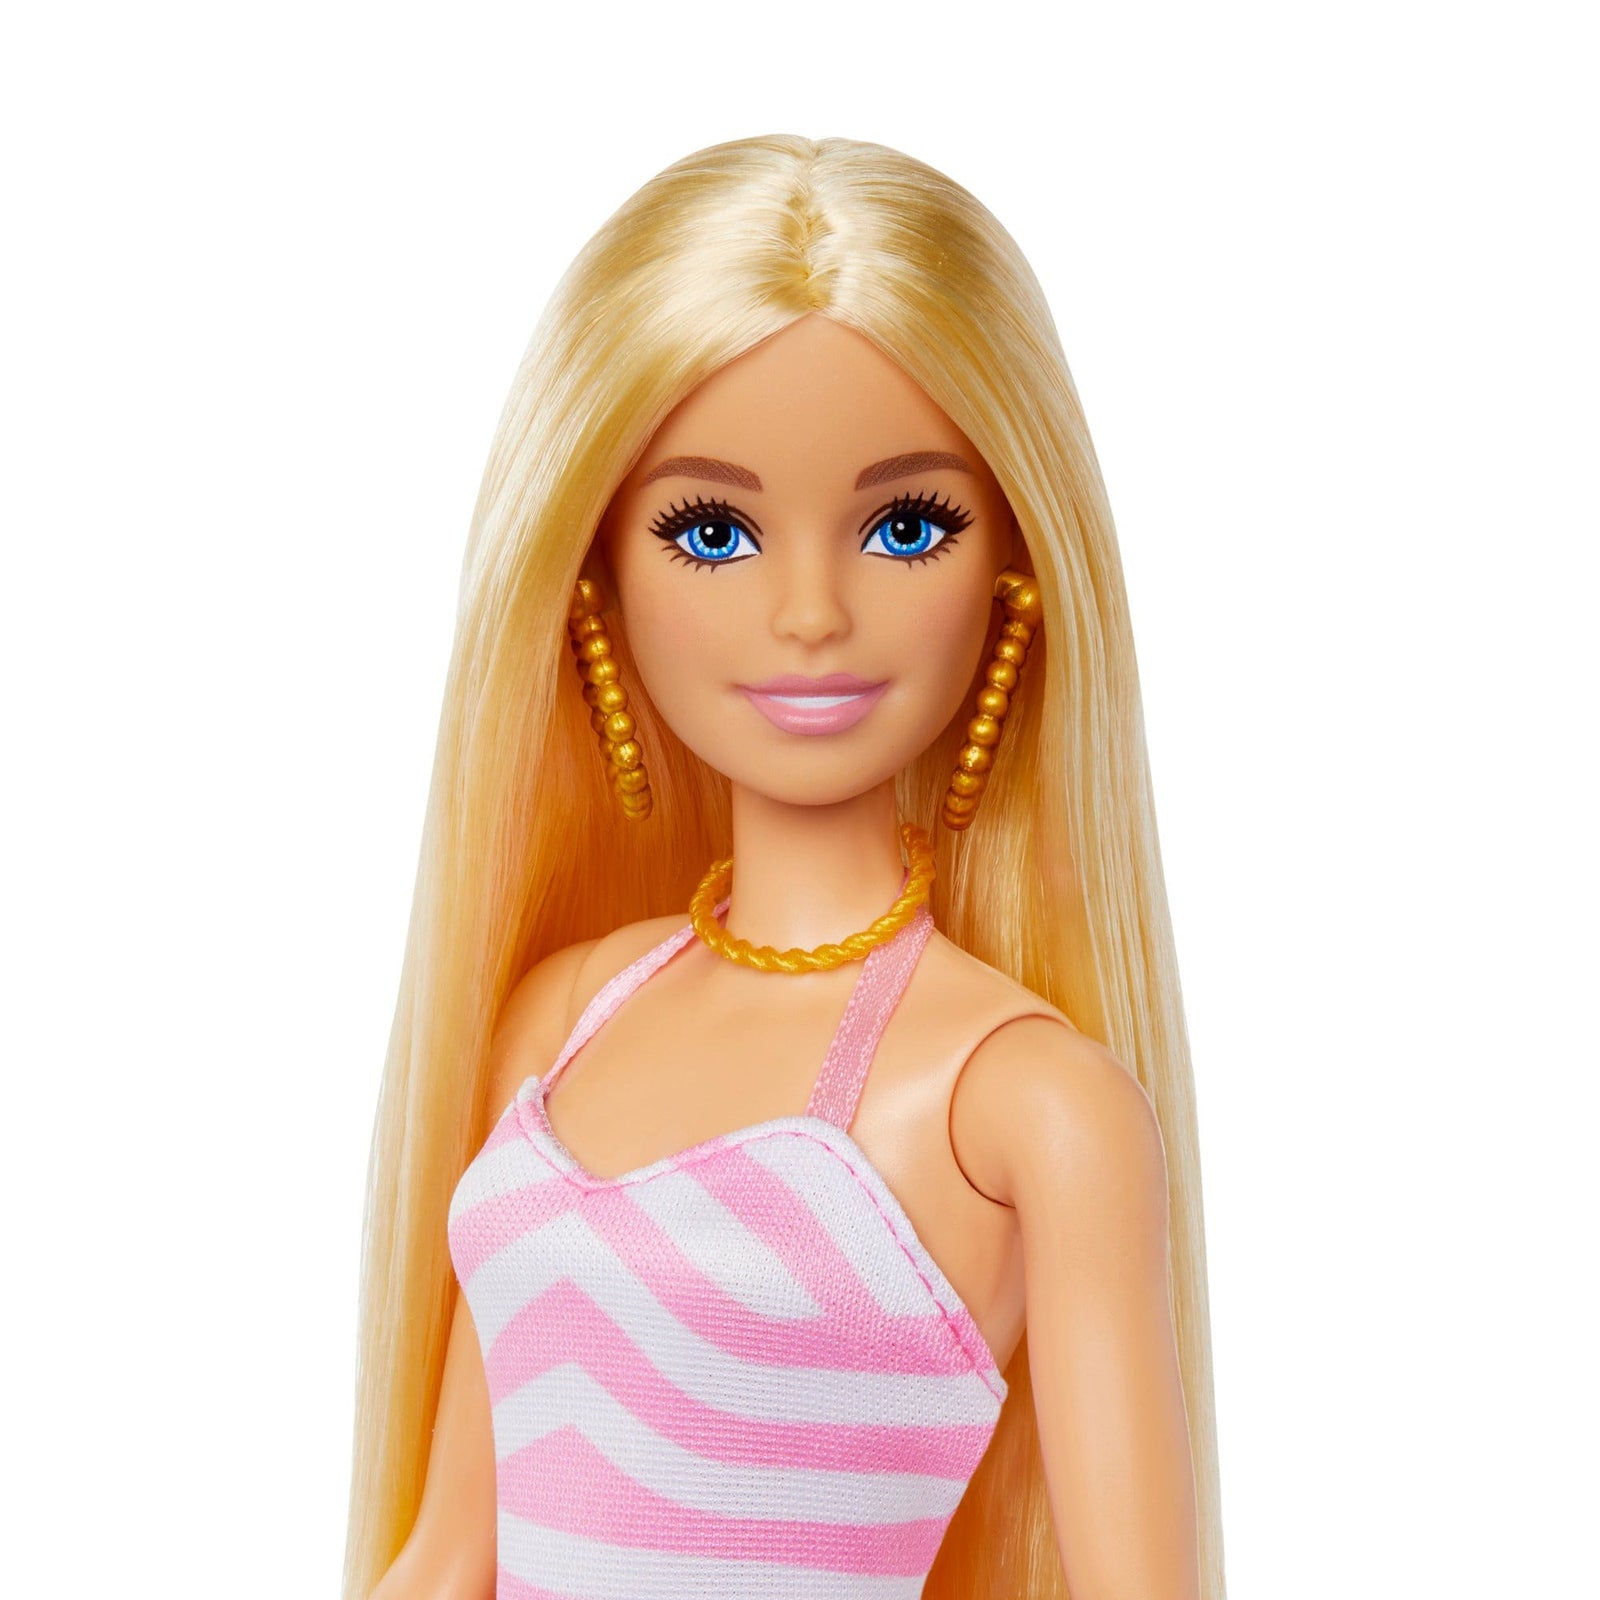 Barbie Blonde Doll with Swimsuit and Beach-Themed Accessories